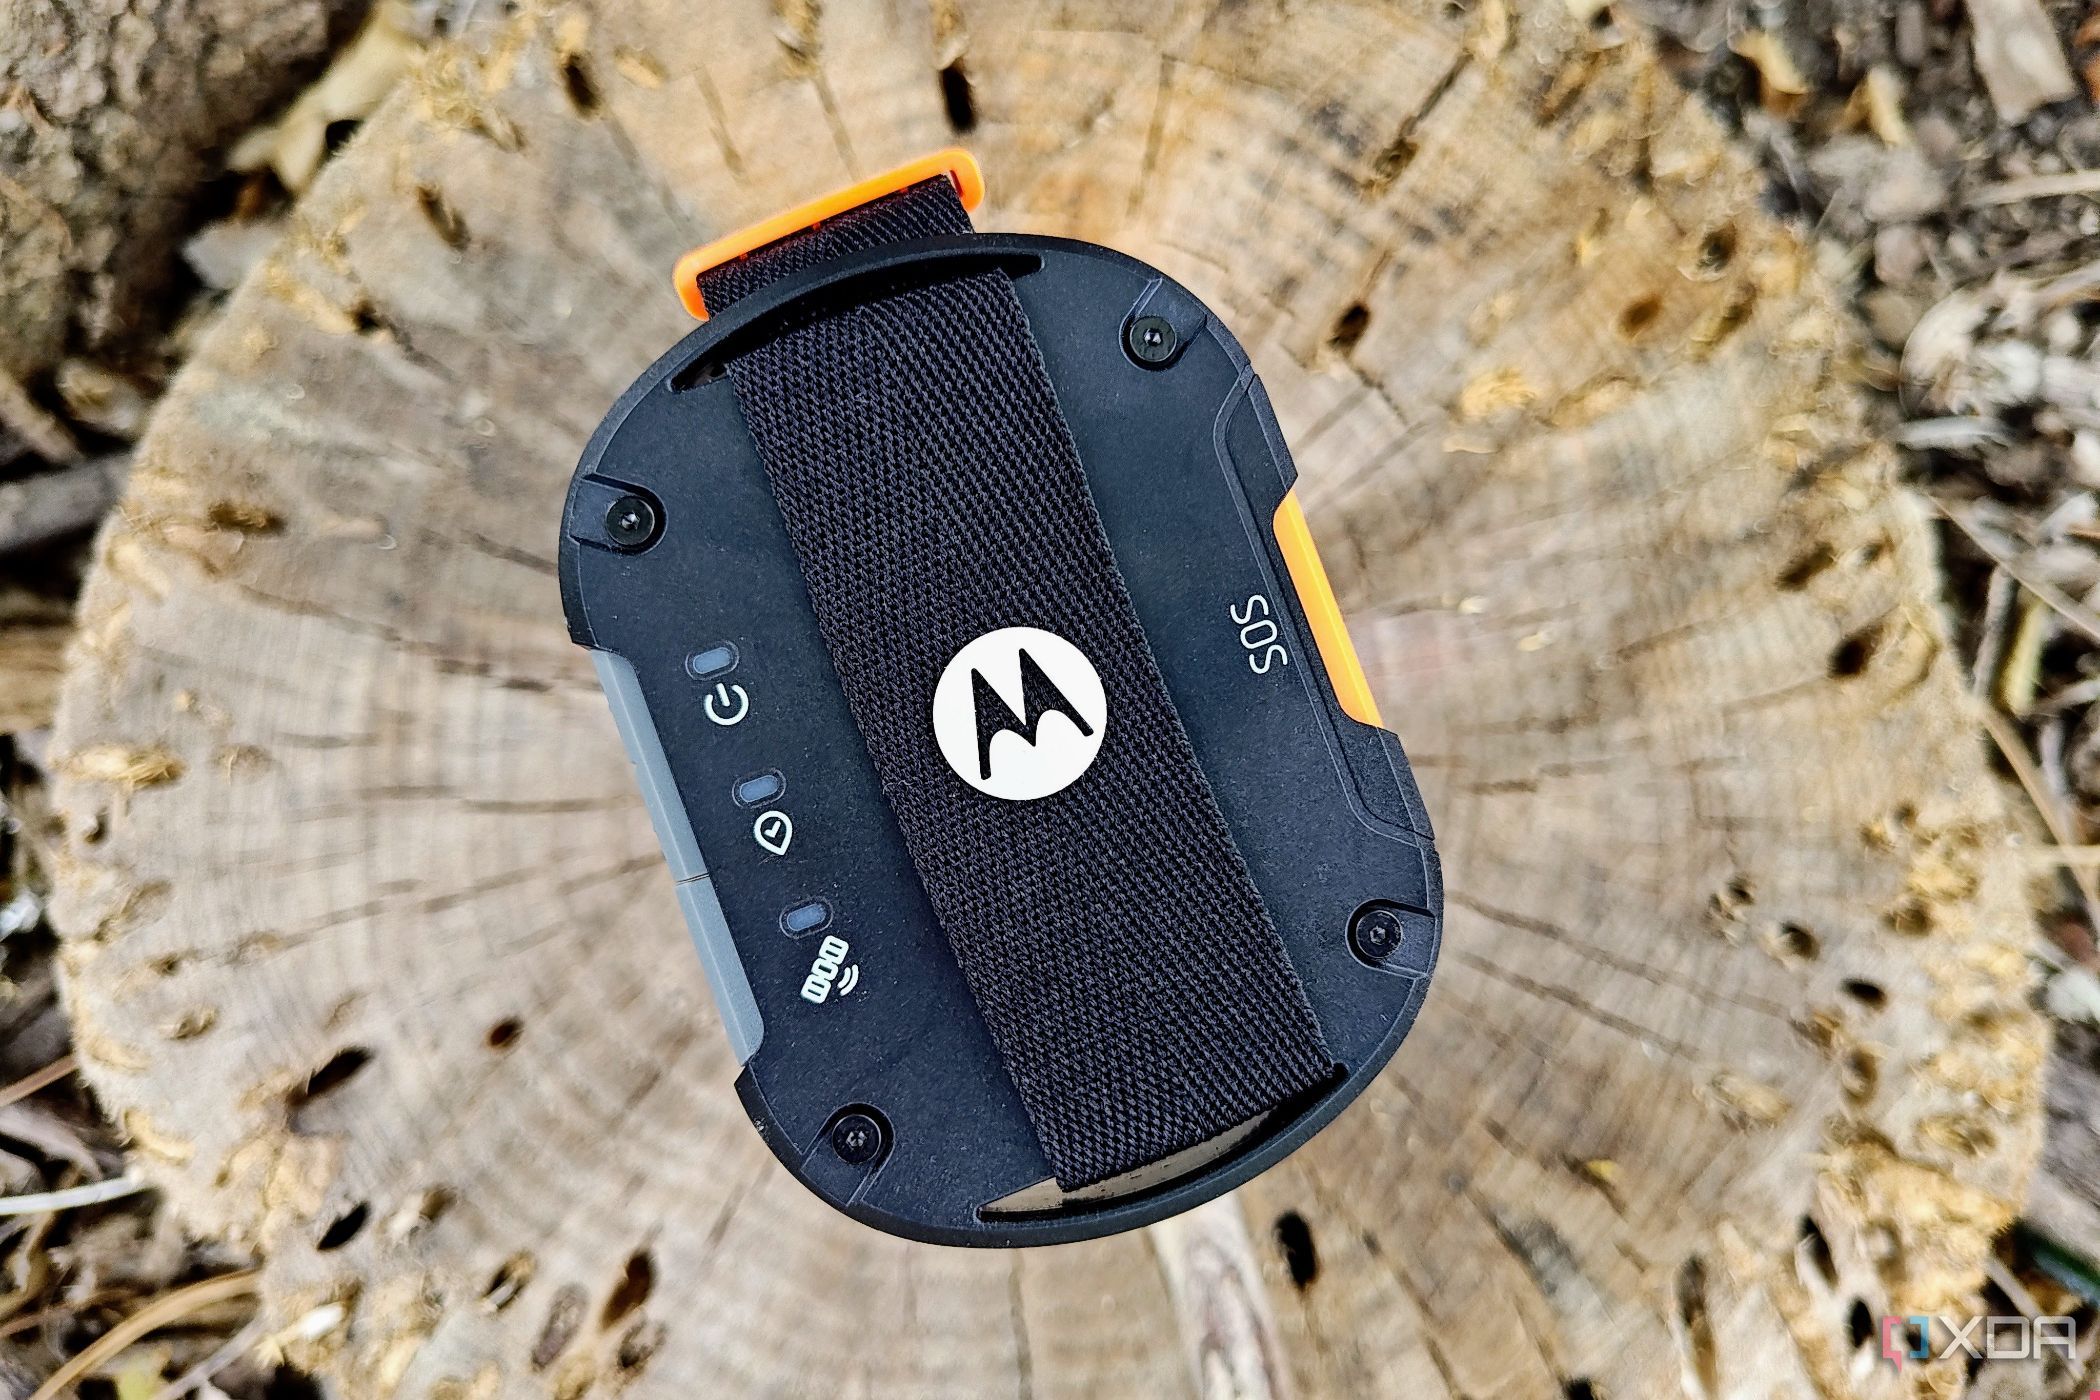 motorola-defy-satellite-link-review:-this-device-can-be-a-real-lifesaver